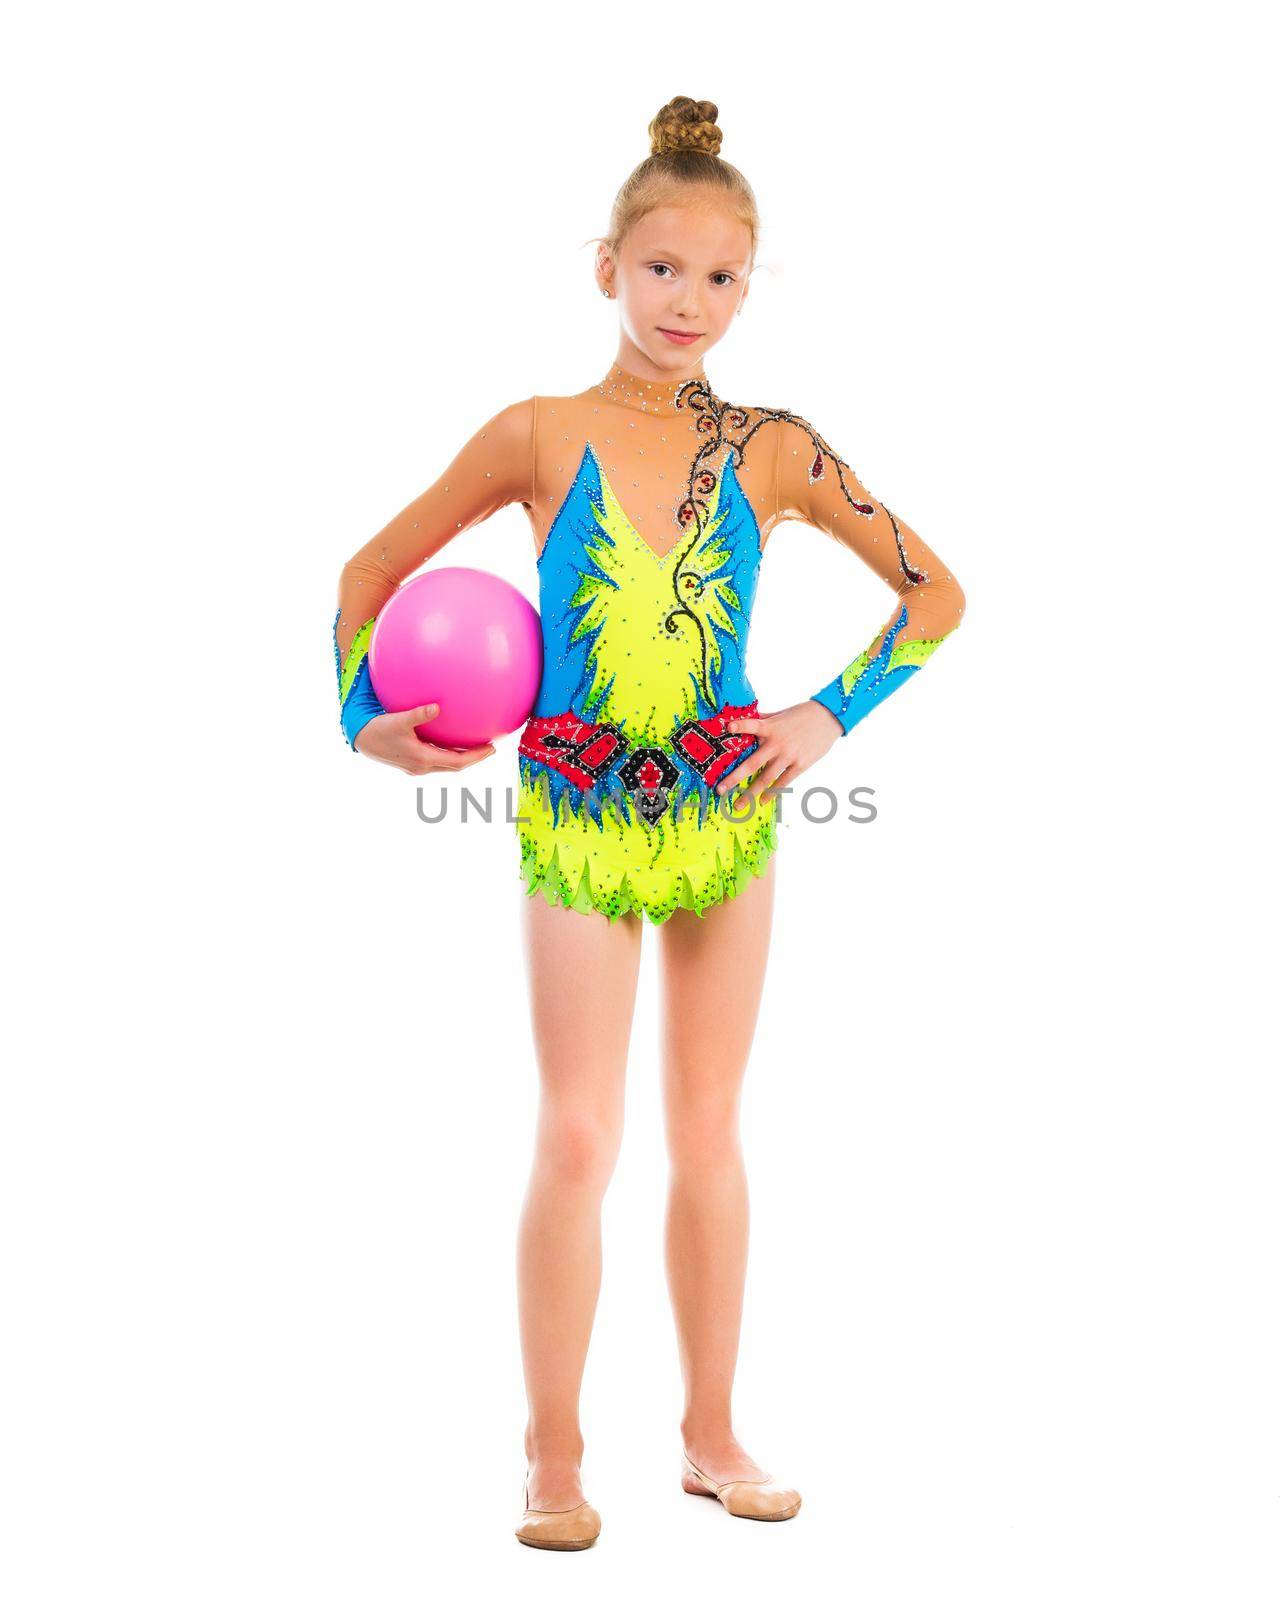 little gymnast doing an exercise with ball by GekaSkr